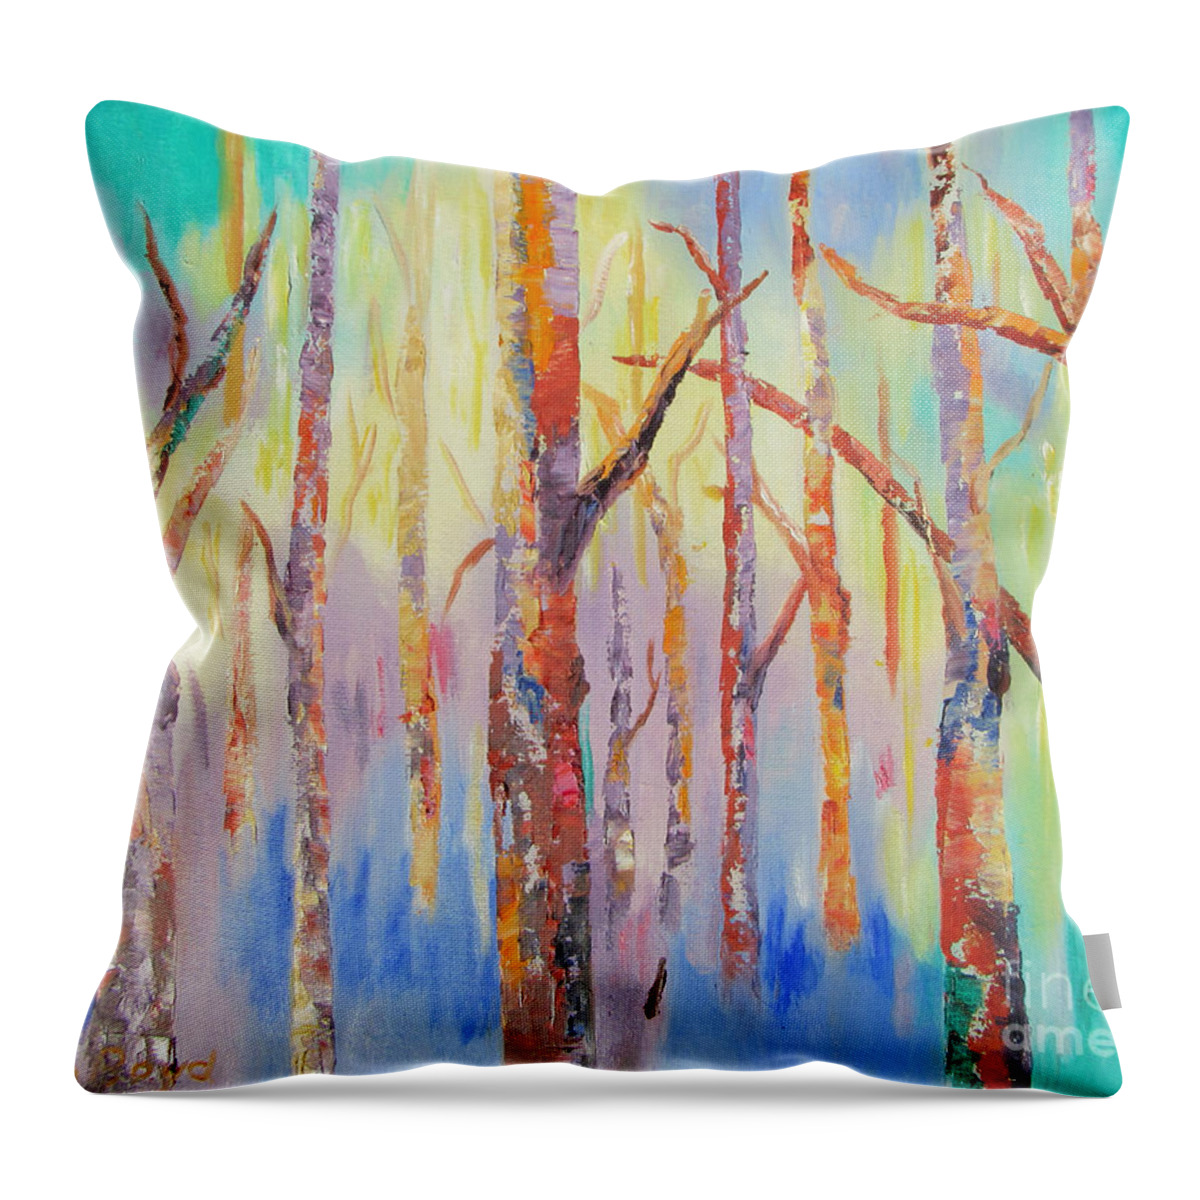 Landscape Throw Pillow featuring the painting Soft Pastels by Lisa Boyd